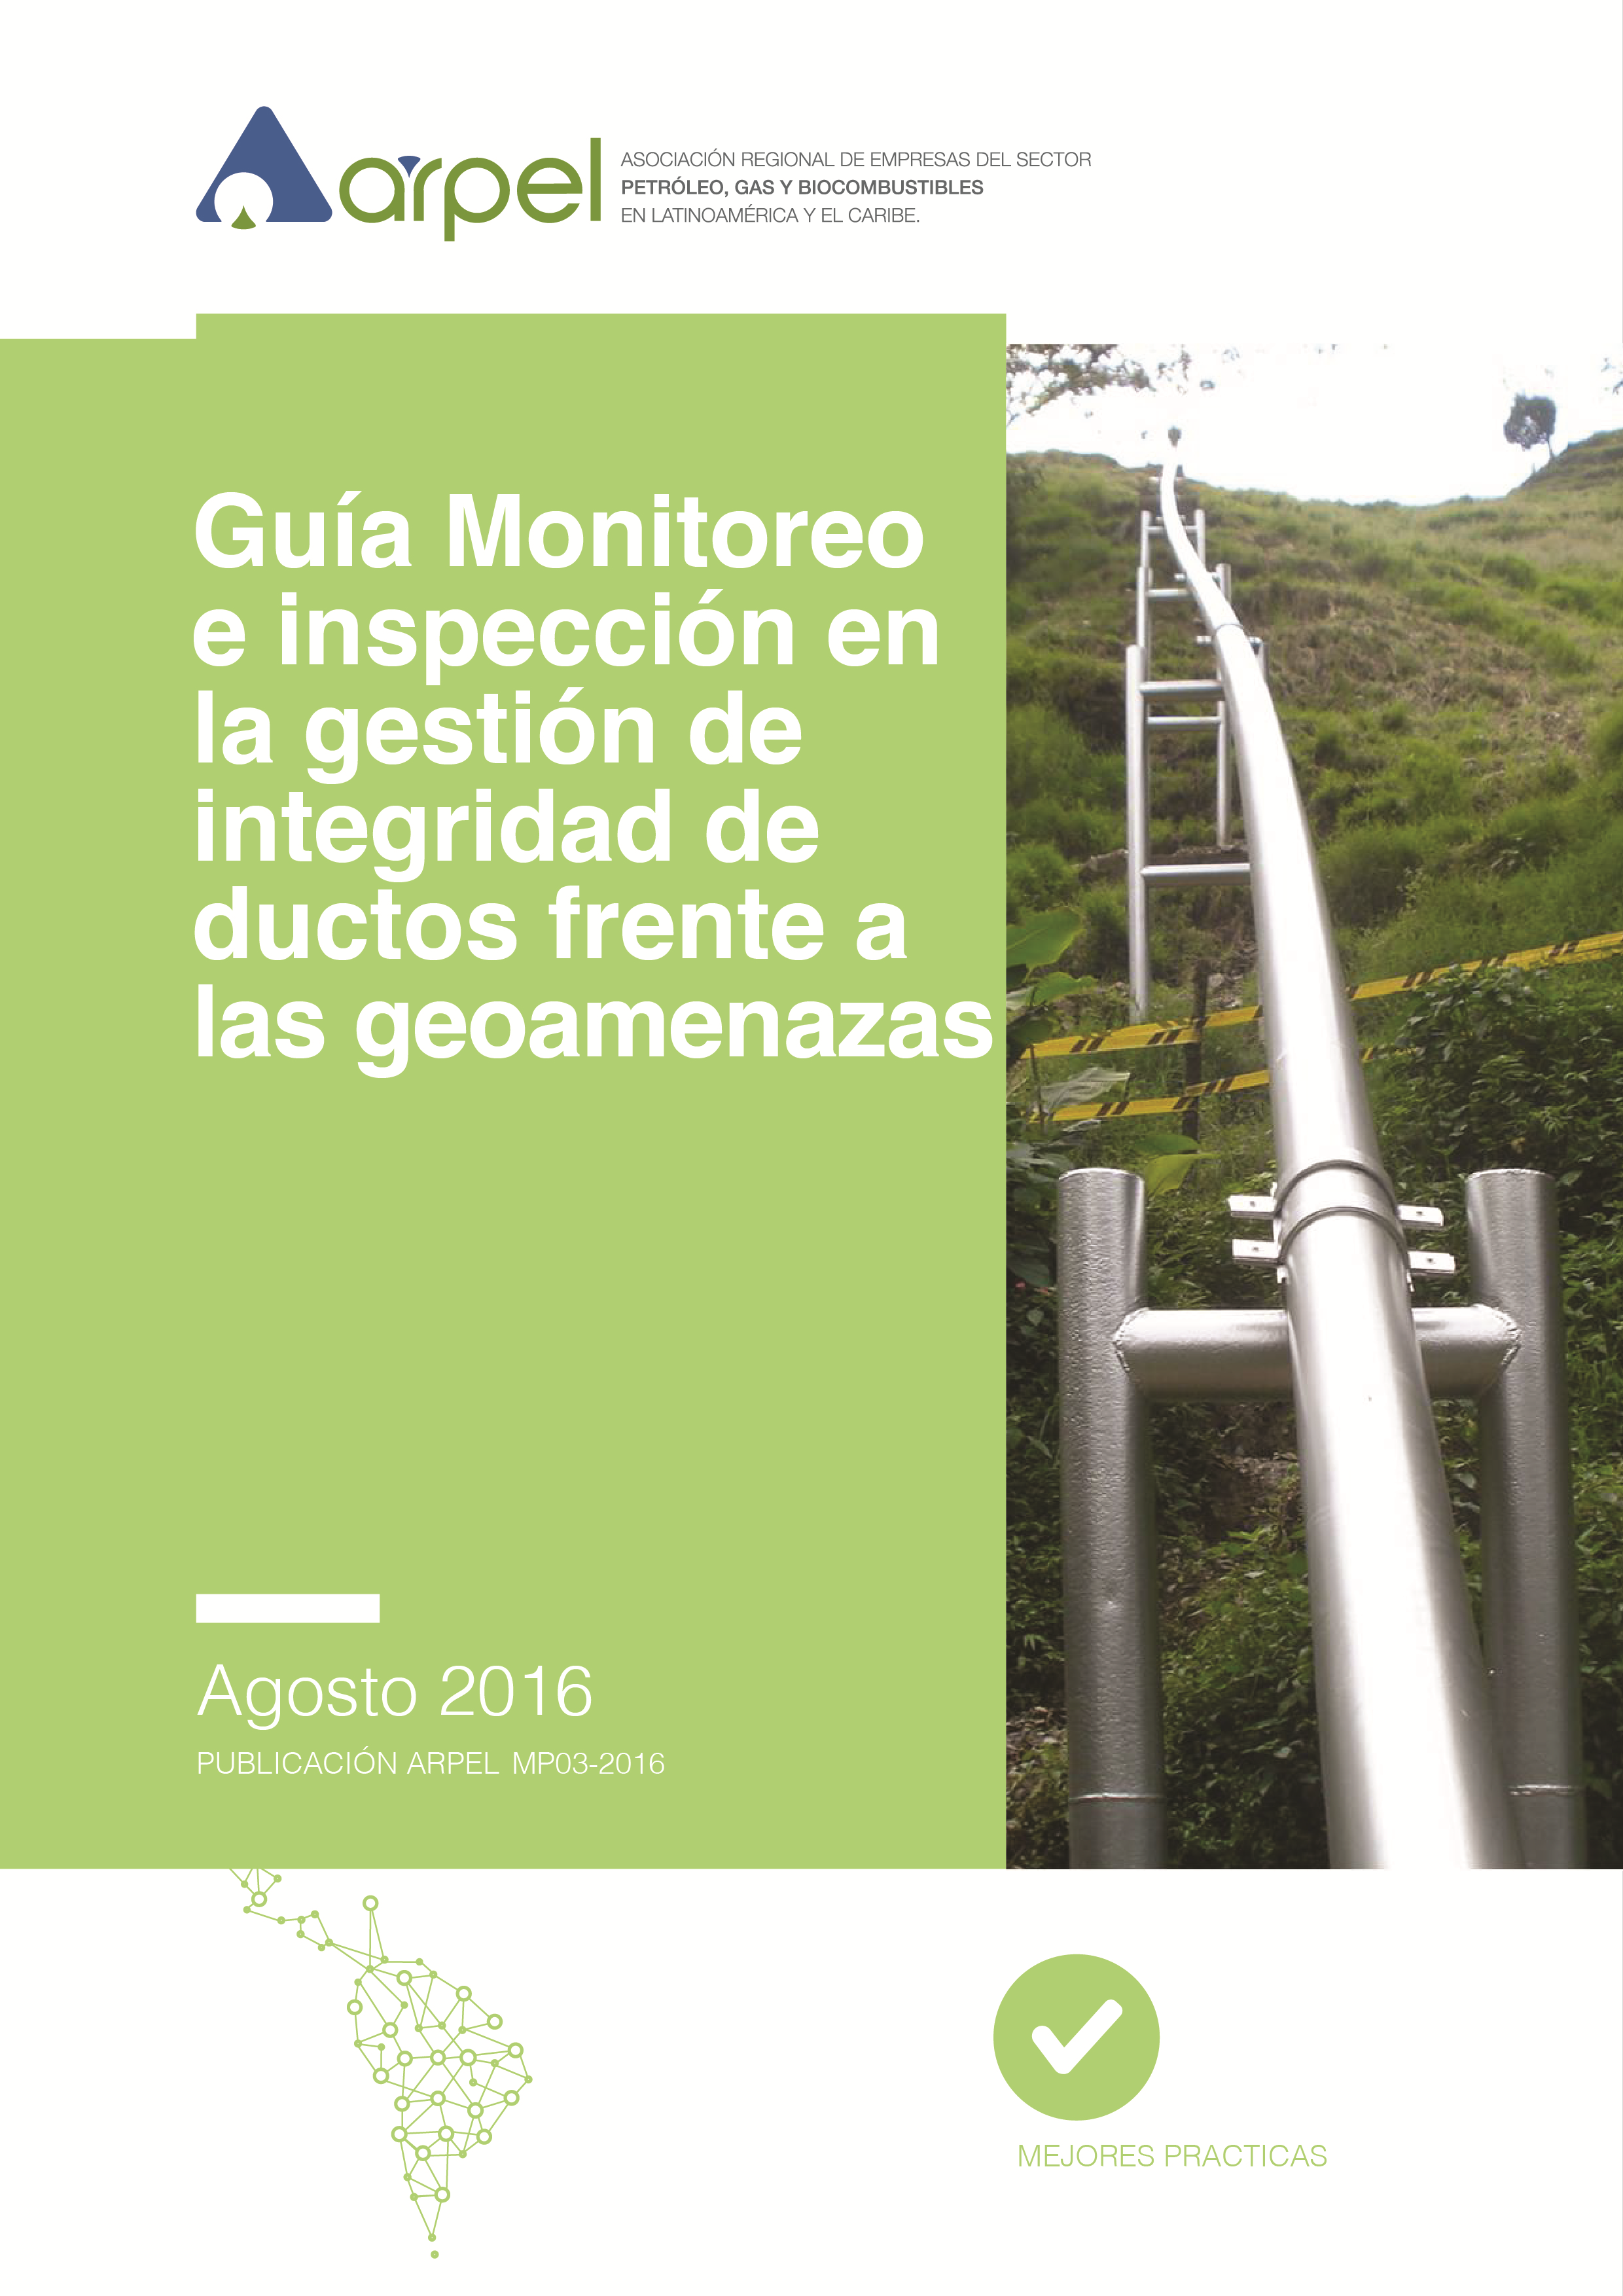 Monitoring and inspection in pipeline integrity management against geothreats